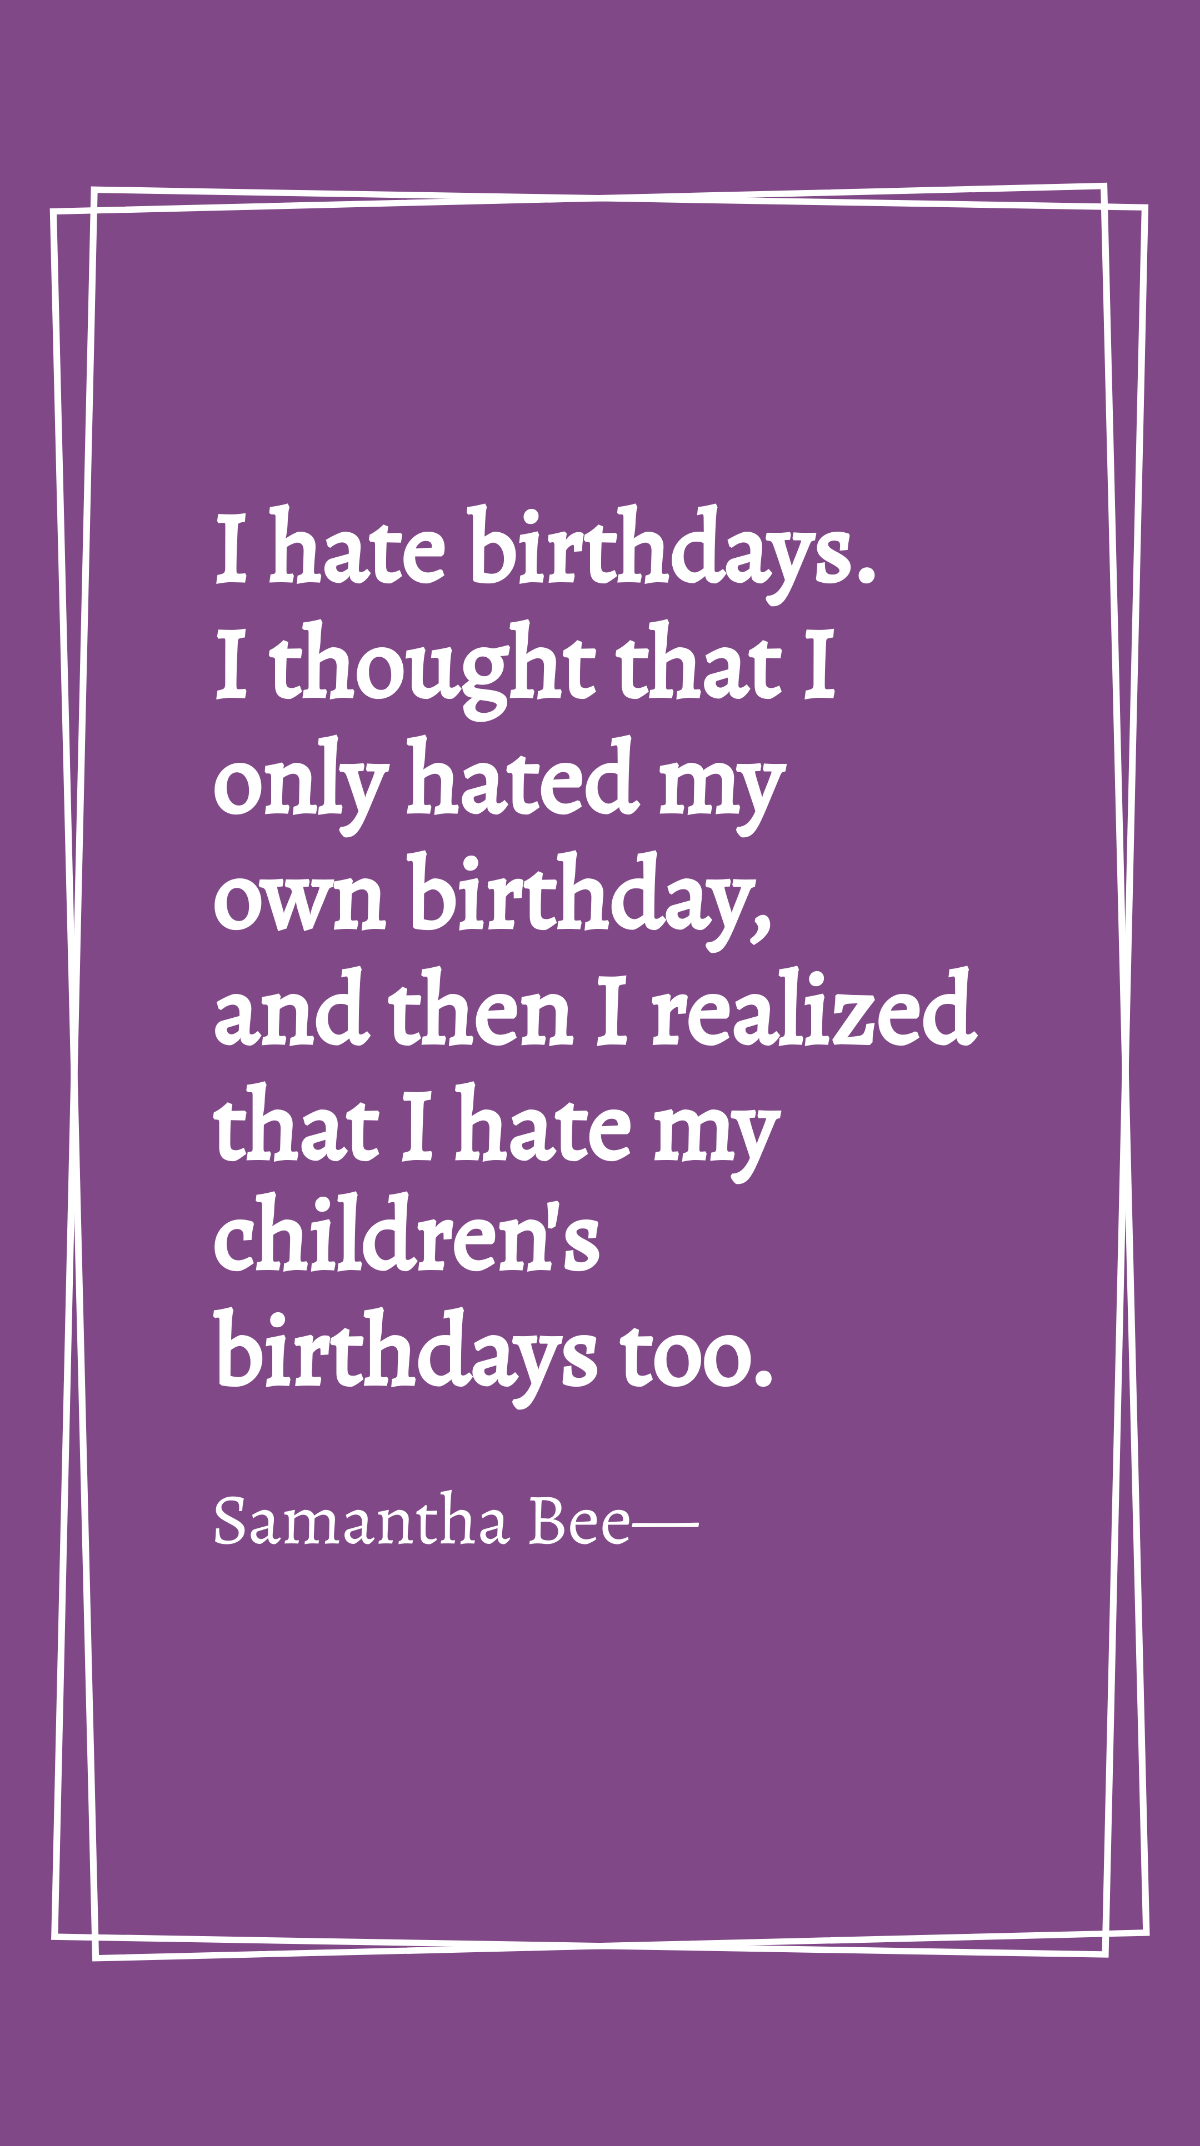 Samantha Bee - I hate birthdays. I thought that I only hated my own birthday, and then I realized that I hate my children's birthdays too. Template